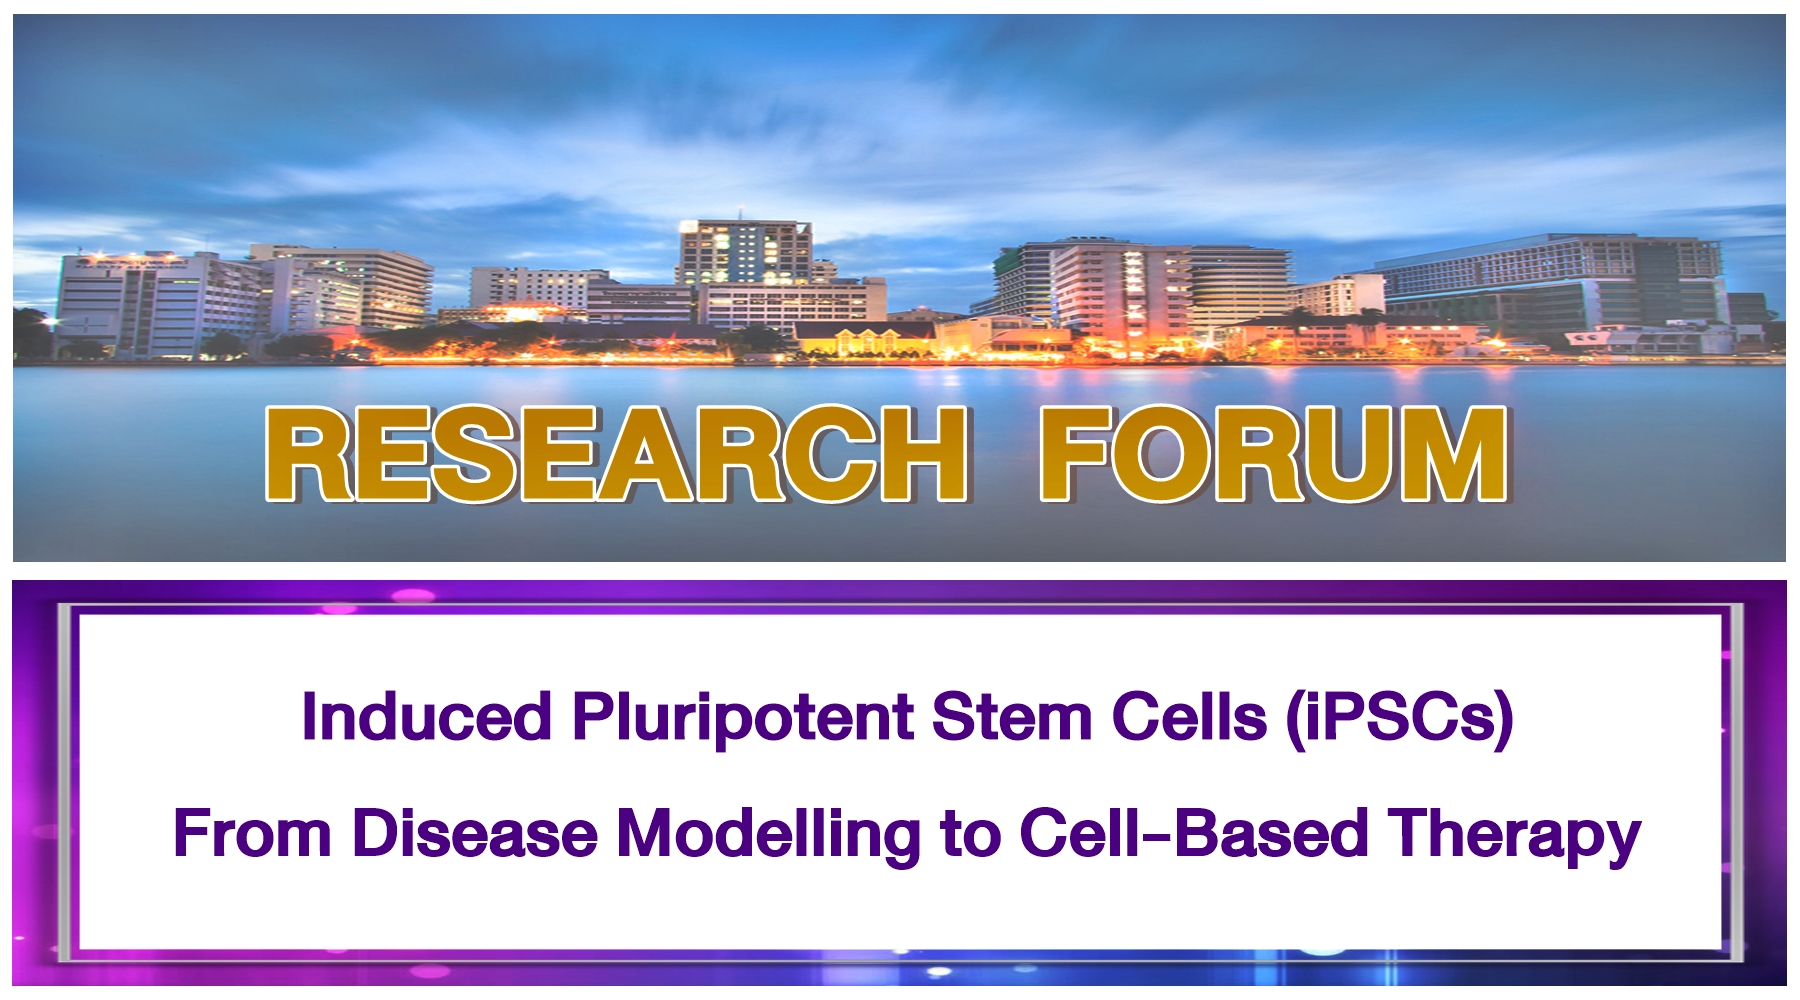 Induced Pluripotent Stem Cell (iPSCs) from Disease Modelling to Cell-Based Therapy